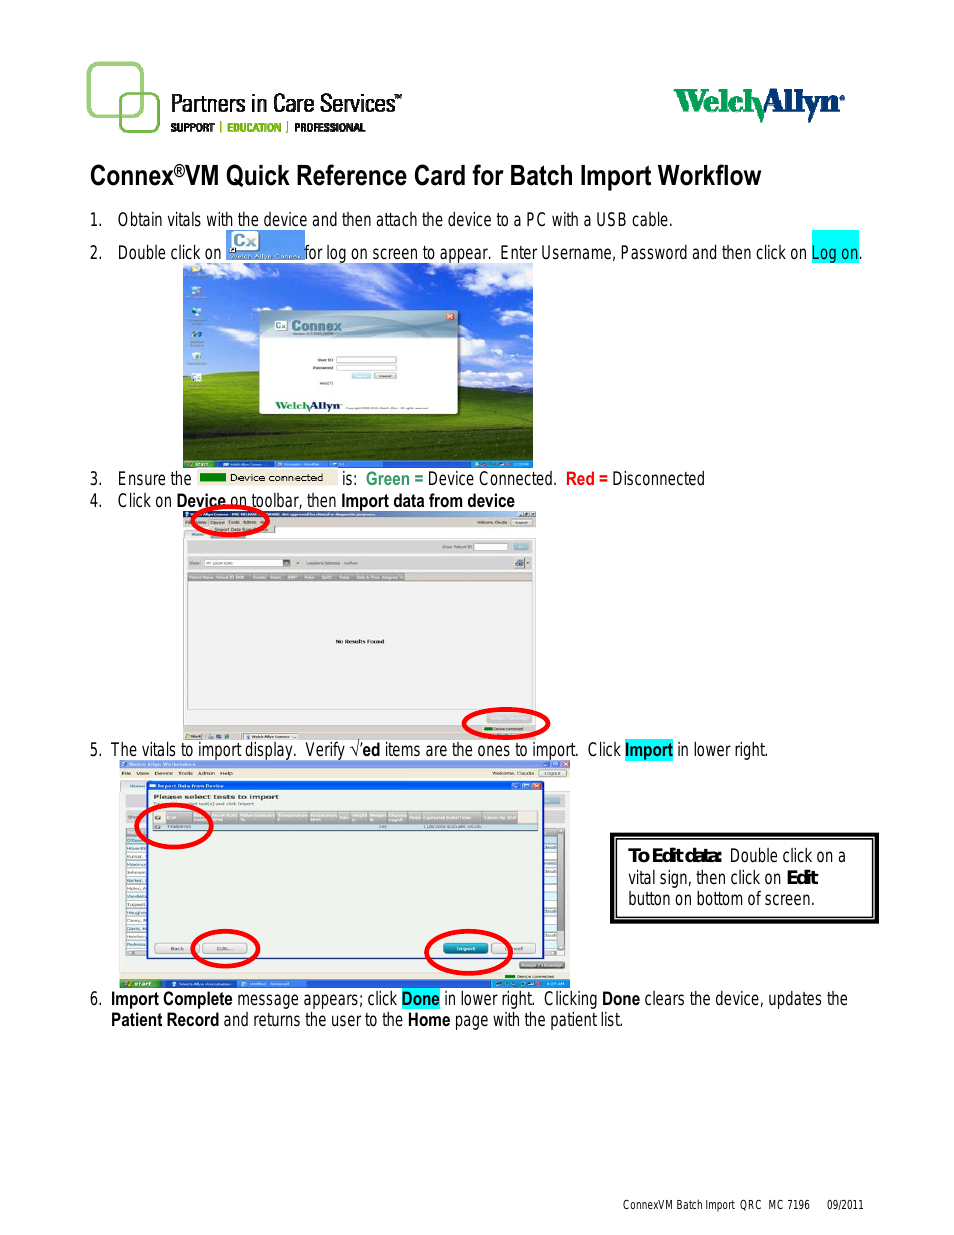 ConnexVM Quick Reference Card for Batch Import Workflow - Quick Reference Guide